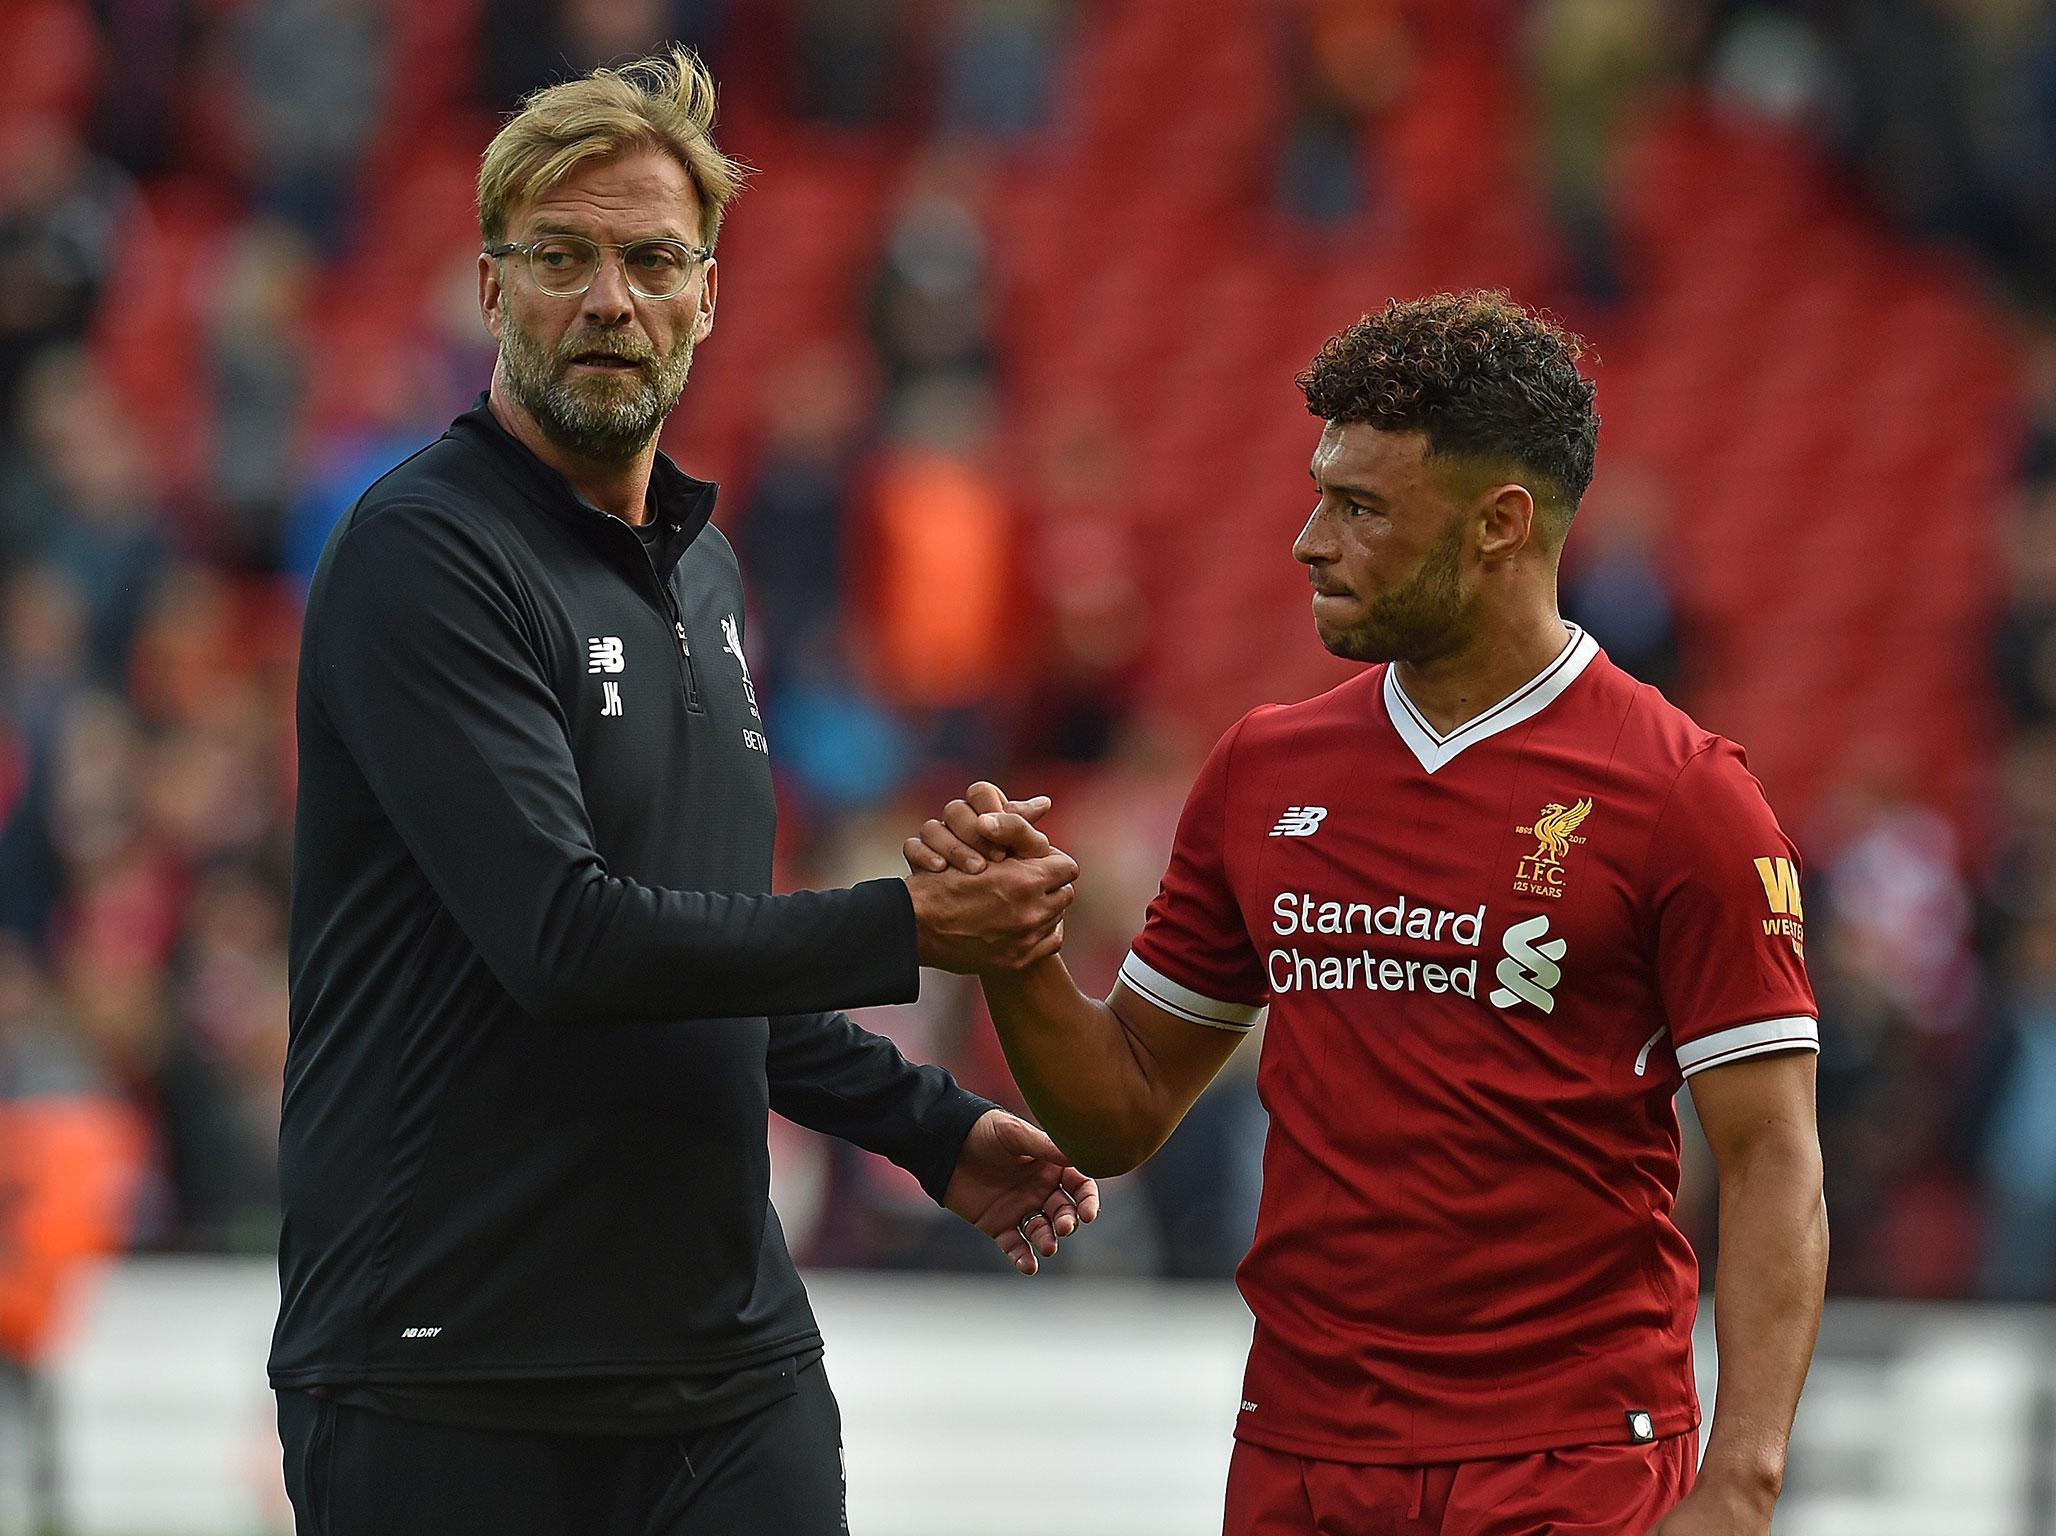 Jurgen Klopp is pleased with how Alex Oxlade-Chamberlain has improved